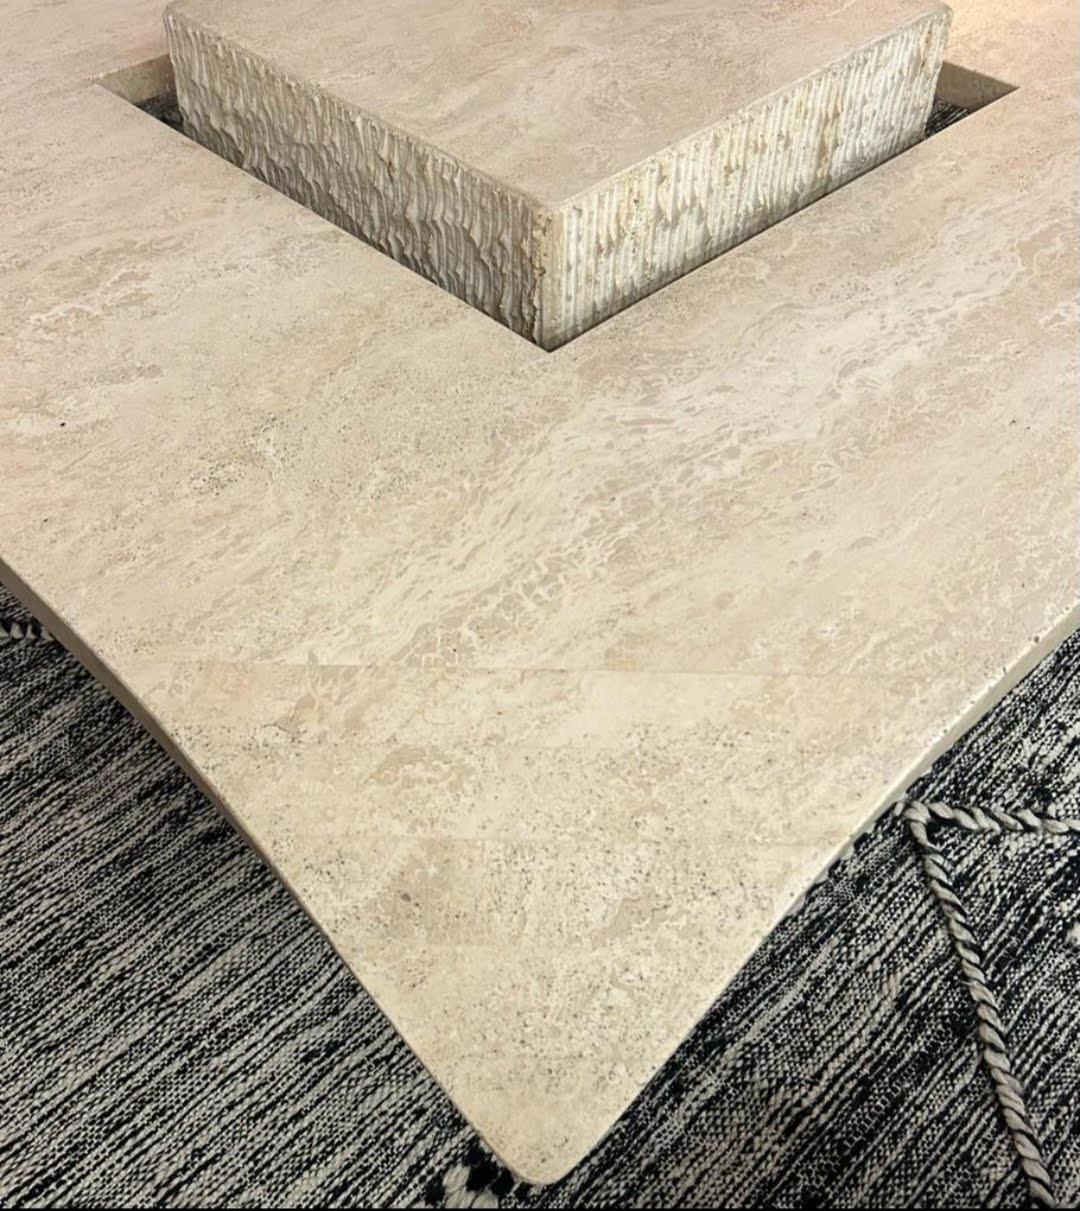 Beautiful Italian square coffee table in cream white travertine with floating top.
.
End of the 70s. 
.
This is a spectacular piece that will go perfectly with a large modular sofa like the camaleonda, soriana or similar or pieces of Willy